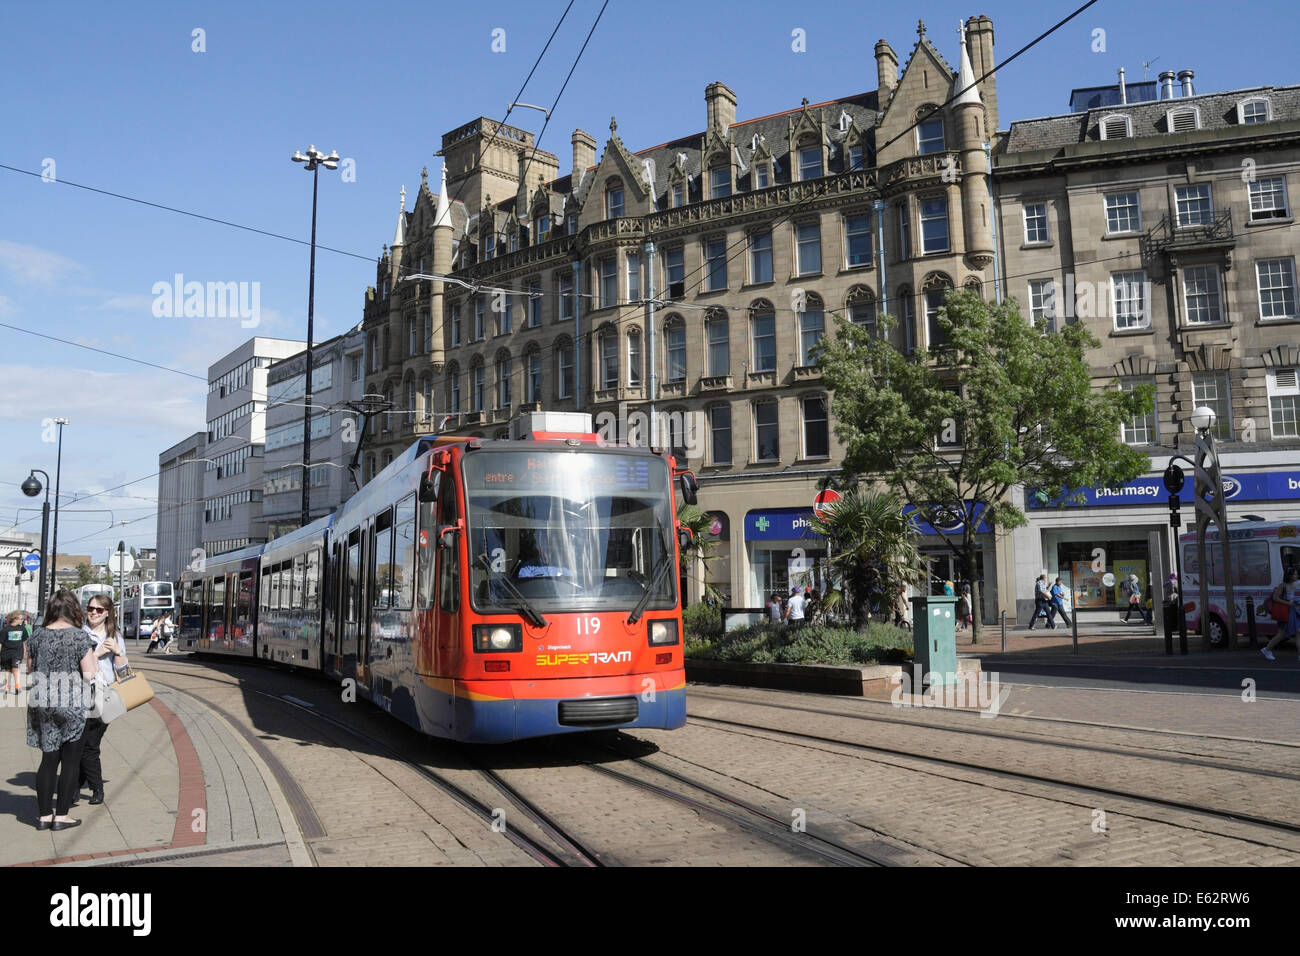 A Supertram approaches the cathedral stop in Sheffield city centre England UK Metro Urban transport, light rail network Stock Photo